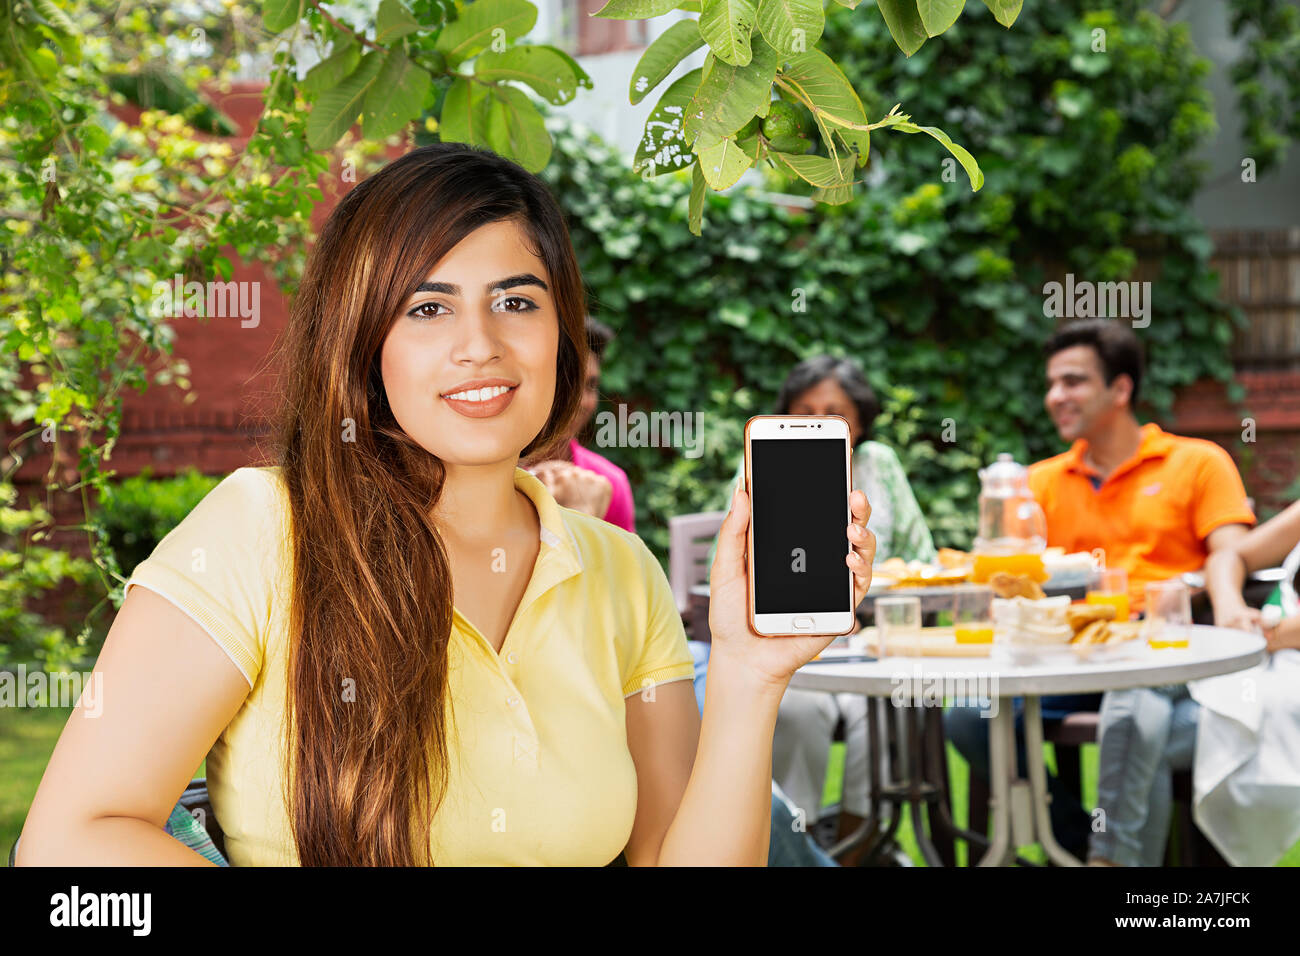 Smiling Female Showing Mobile-Phone in-garden home with family Eating Breakfast in the background Stock Photo